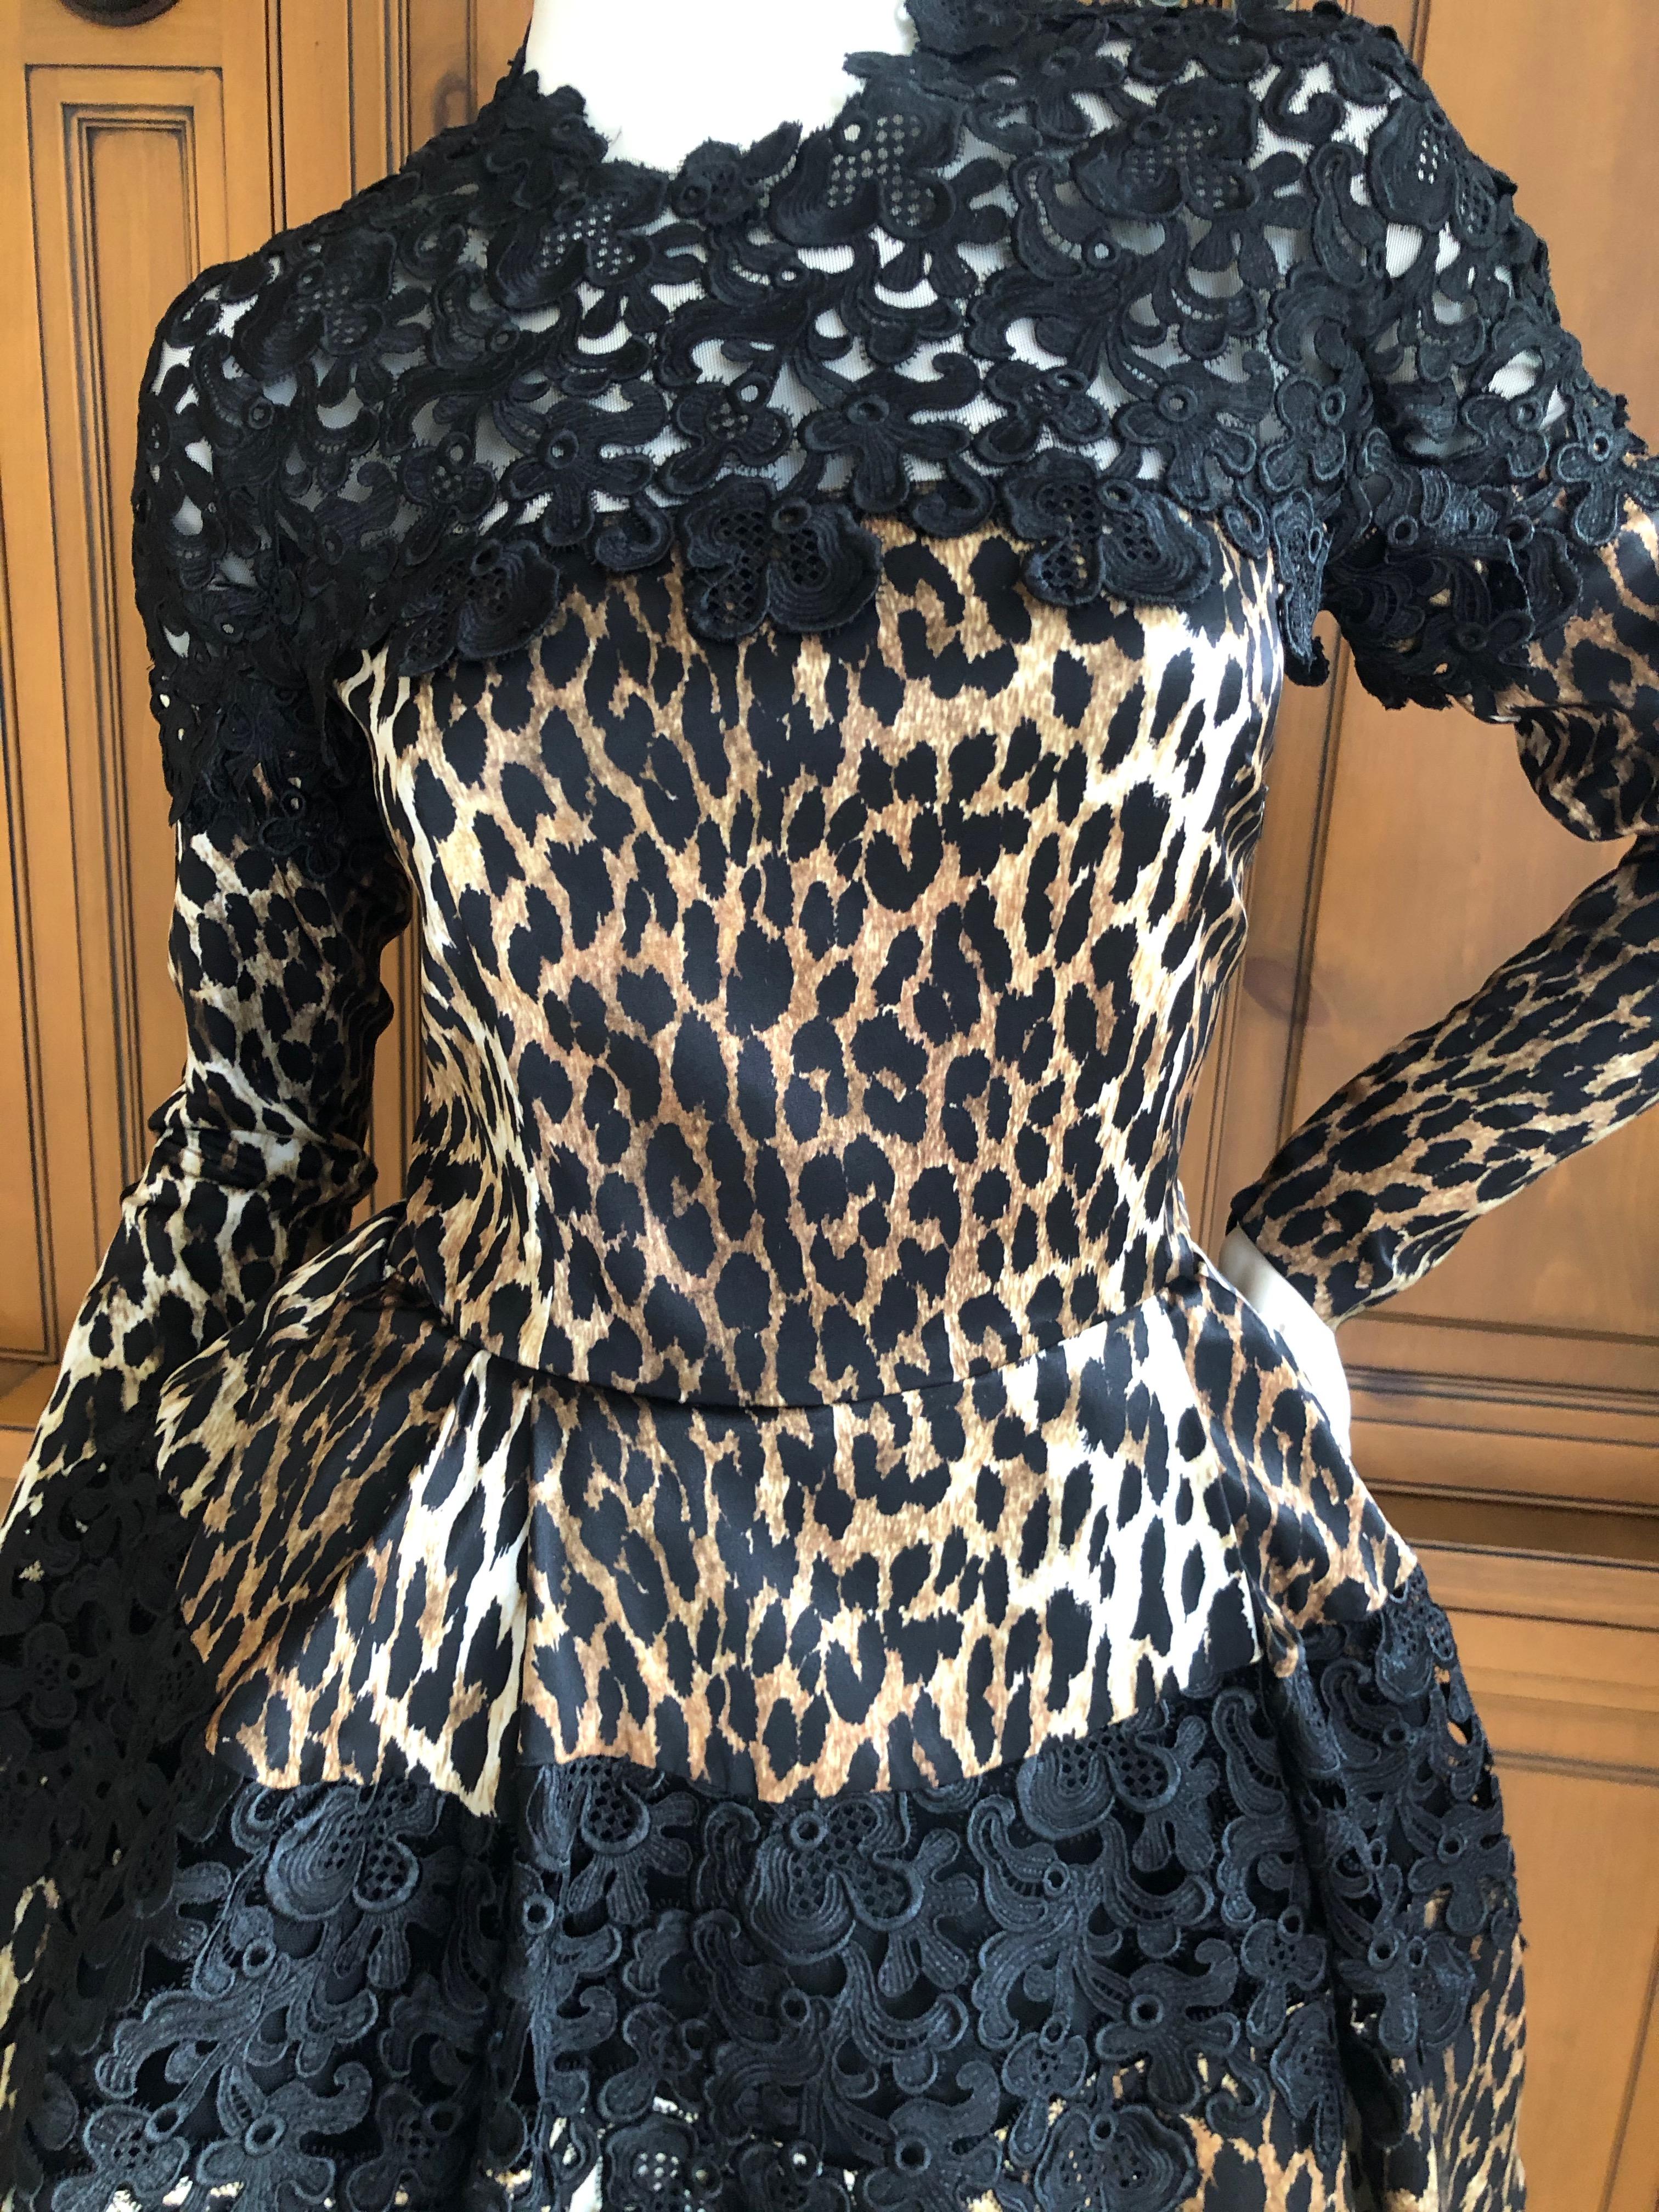 Emanuel Ungaro Seventies Guipure Lace Leopard Print Pouf Mini Dress.
This is so pretty with a very structured horsehair petticoat underneath. 
Much prettier in person.
These vintage French dresses are so beautifully made, this has four